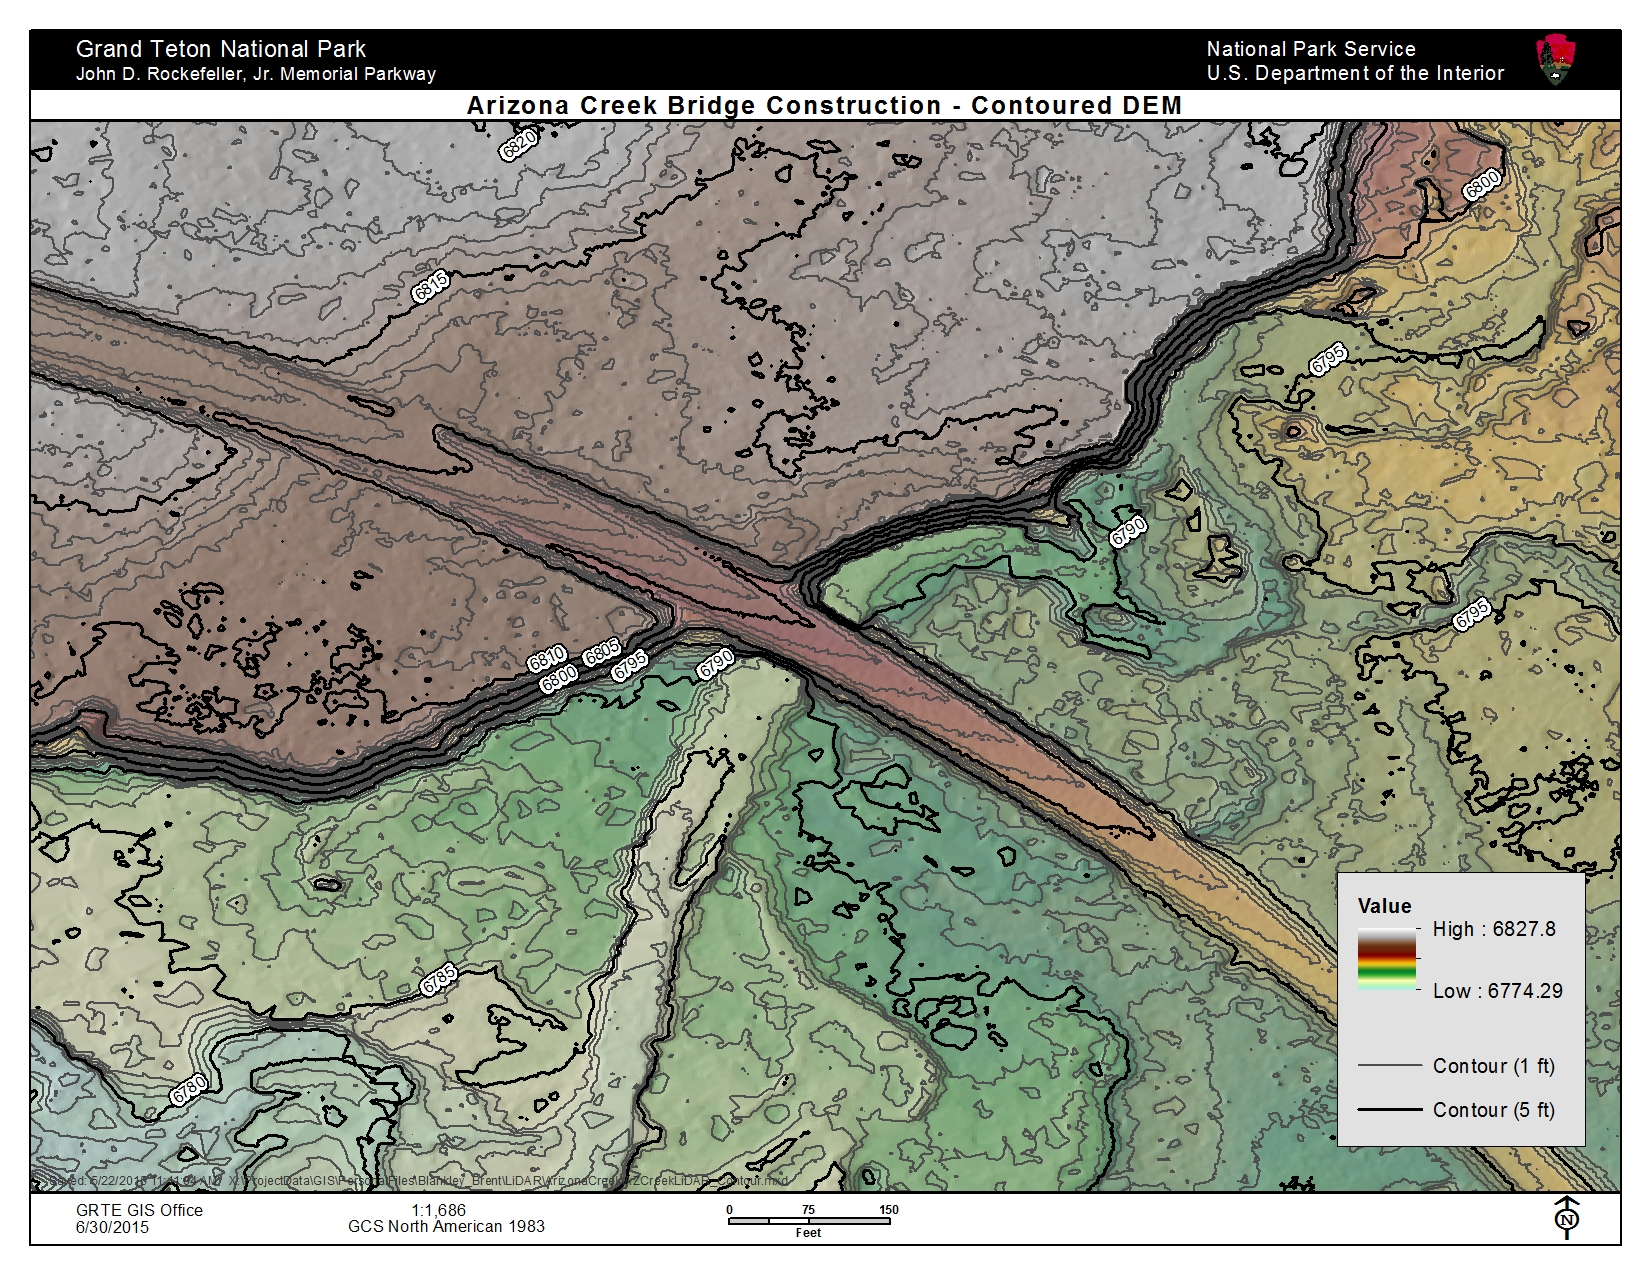 Contour map (1 and 5 foot) of bridge replacement project area (B. Blankley, NPS).